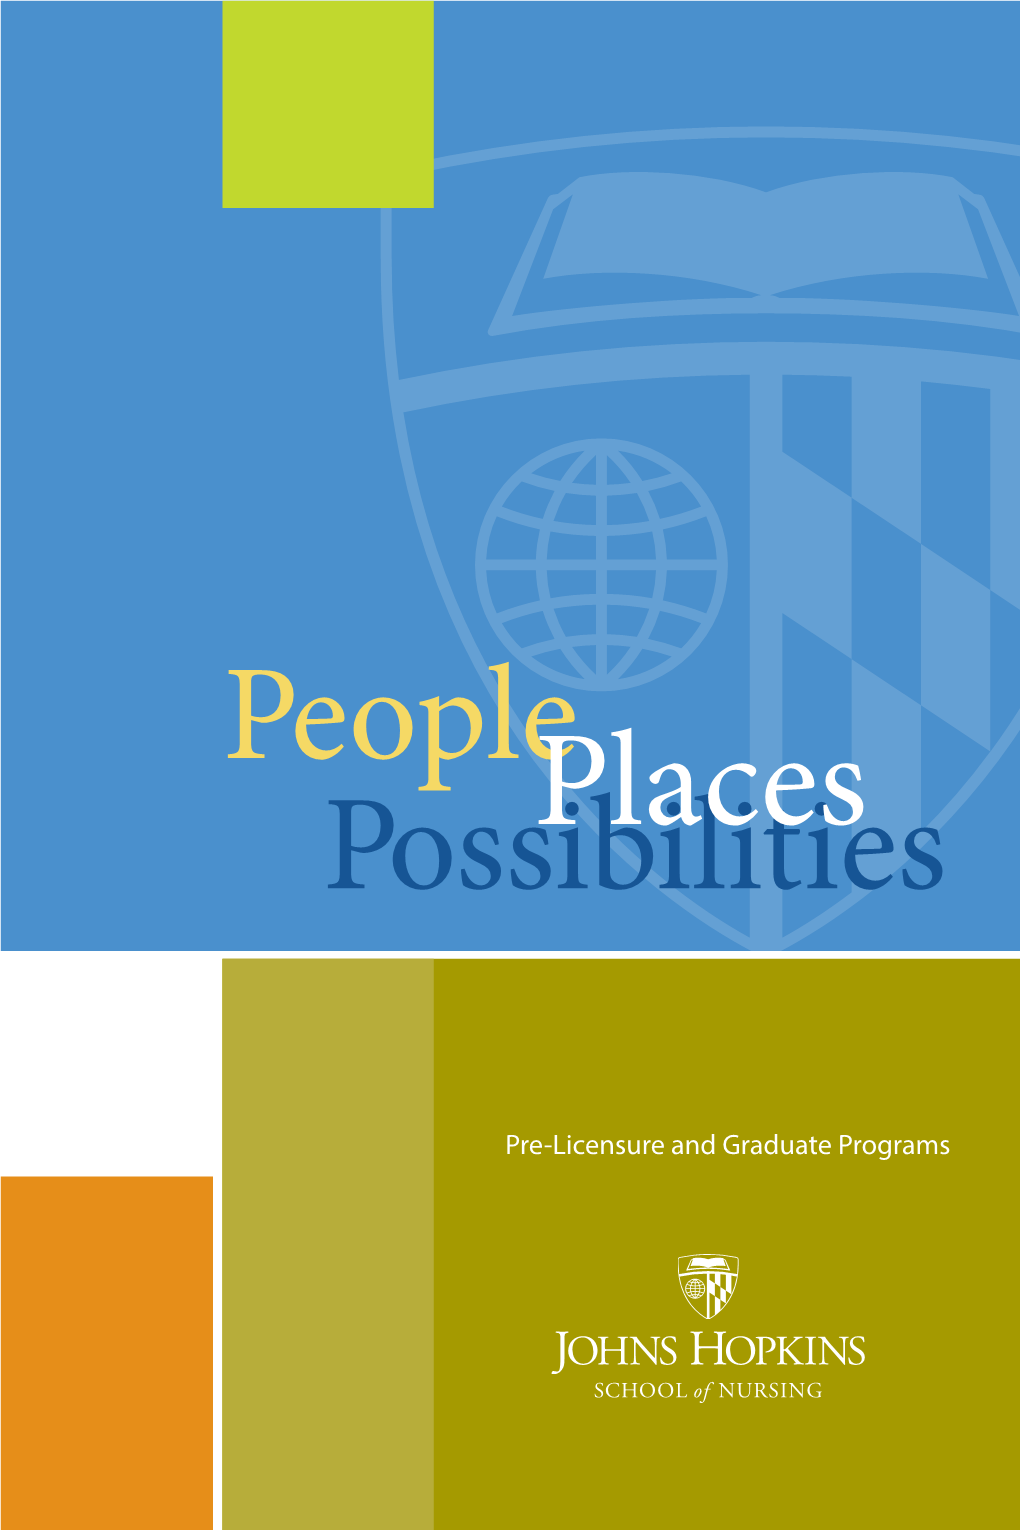 People Possibilities Places